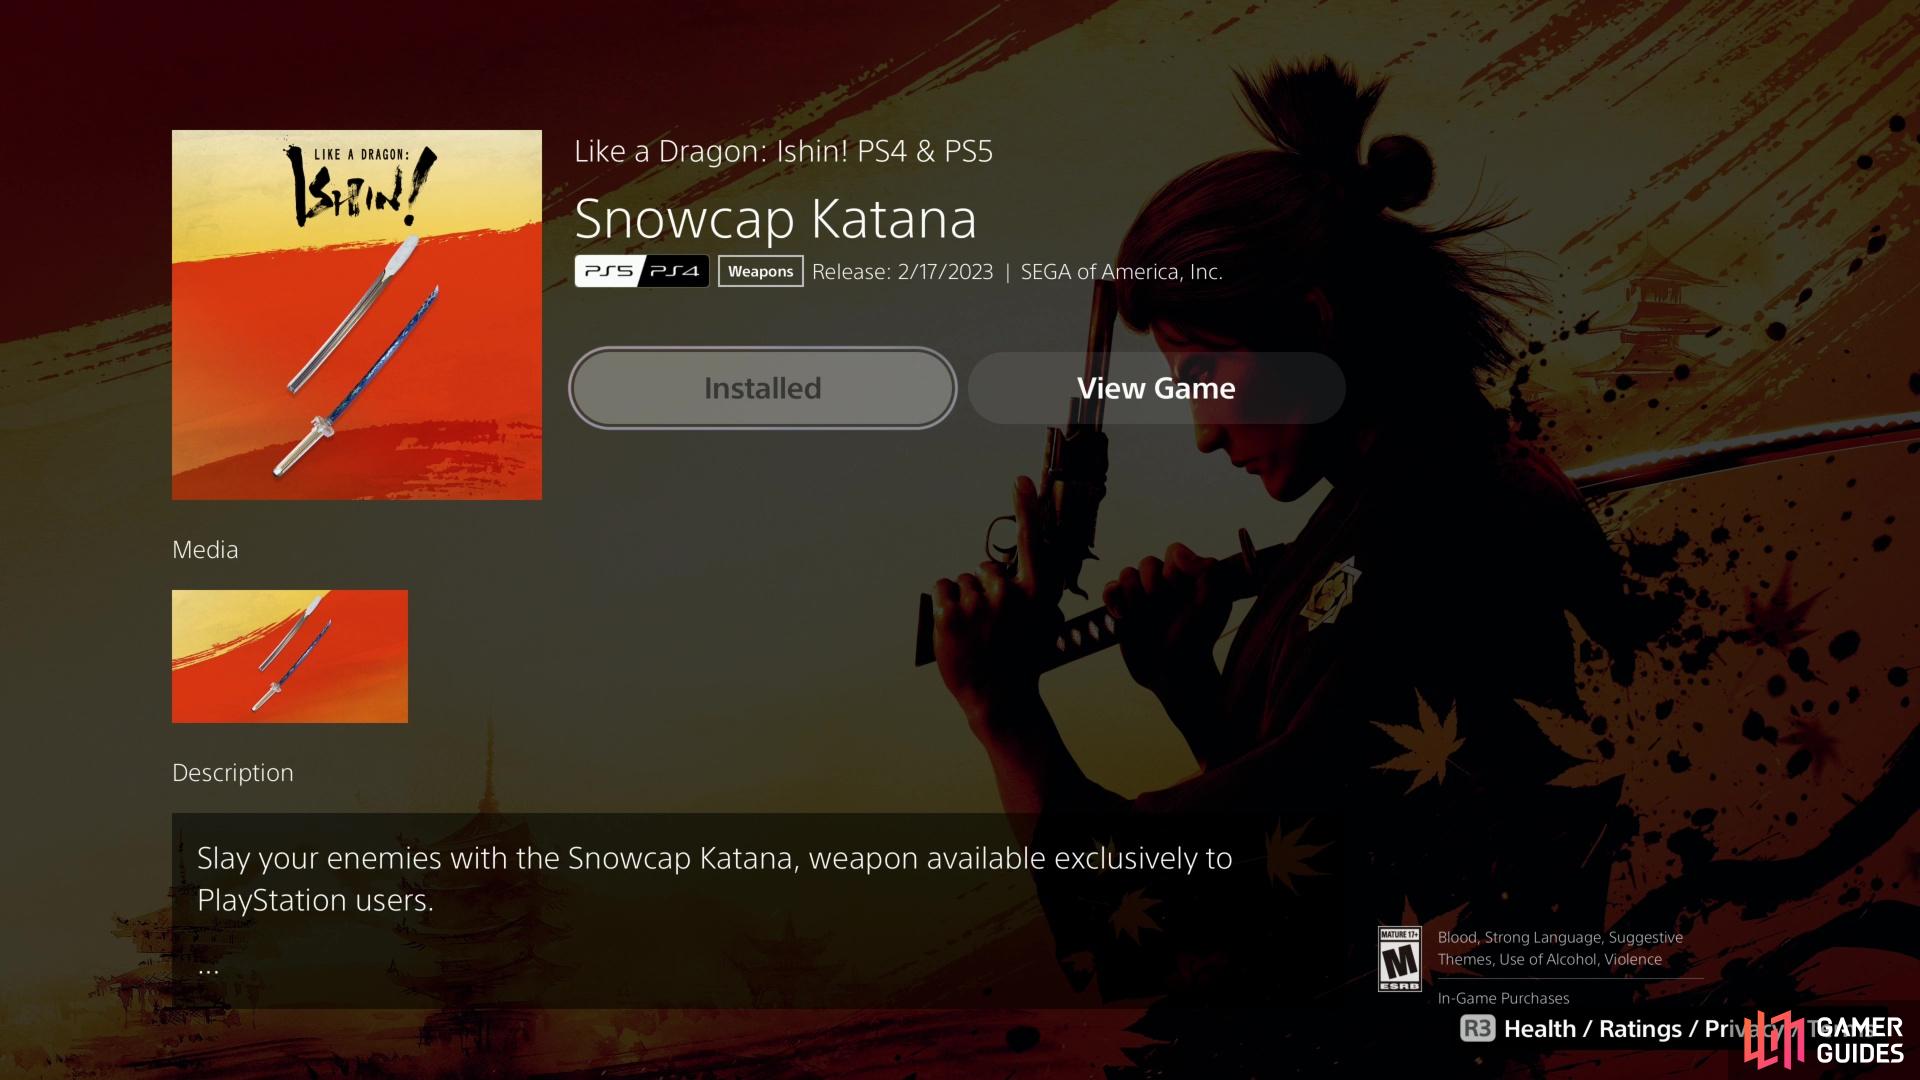 Download the Snowcap katana from the PlayStation store,